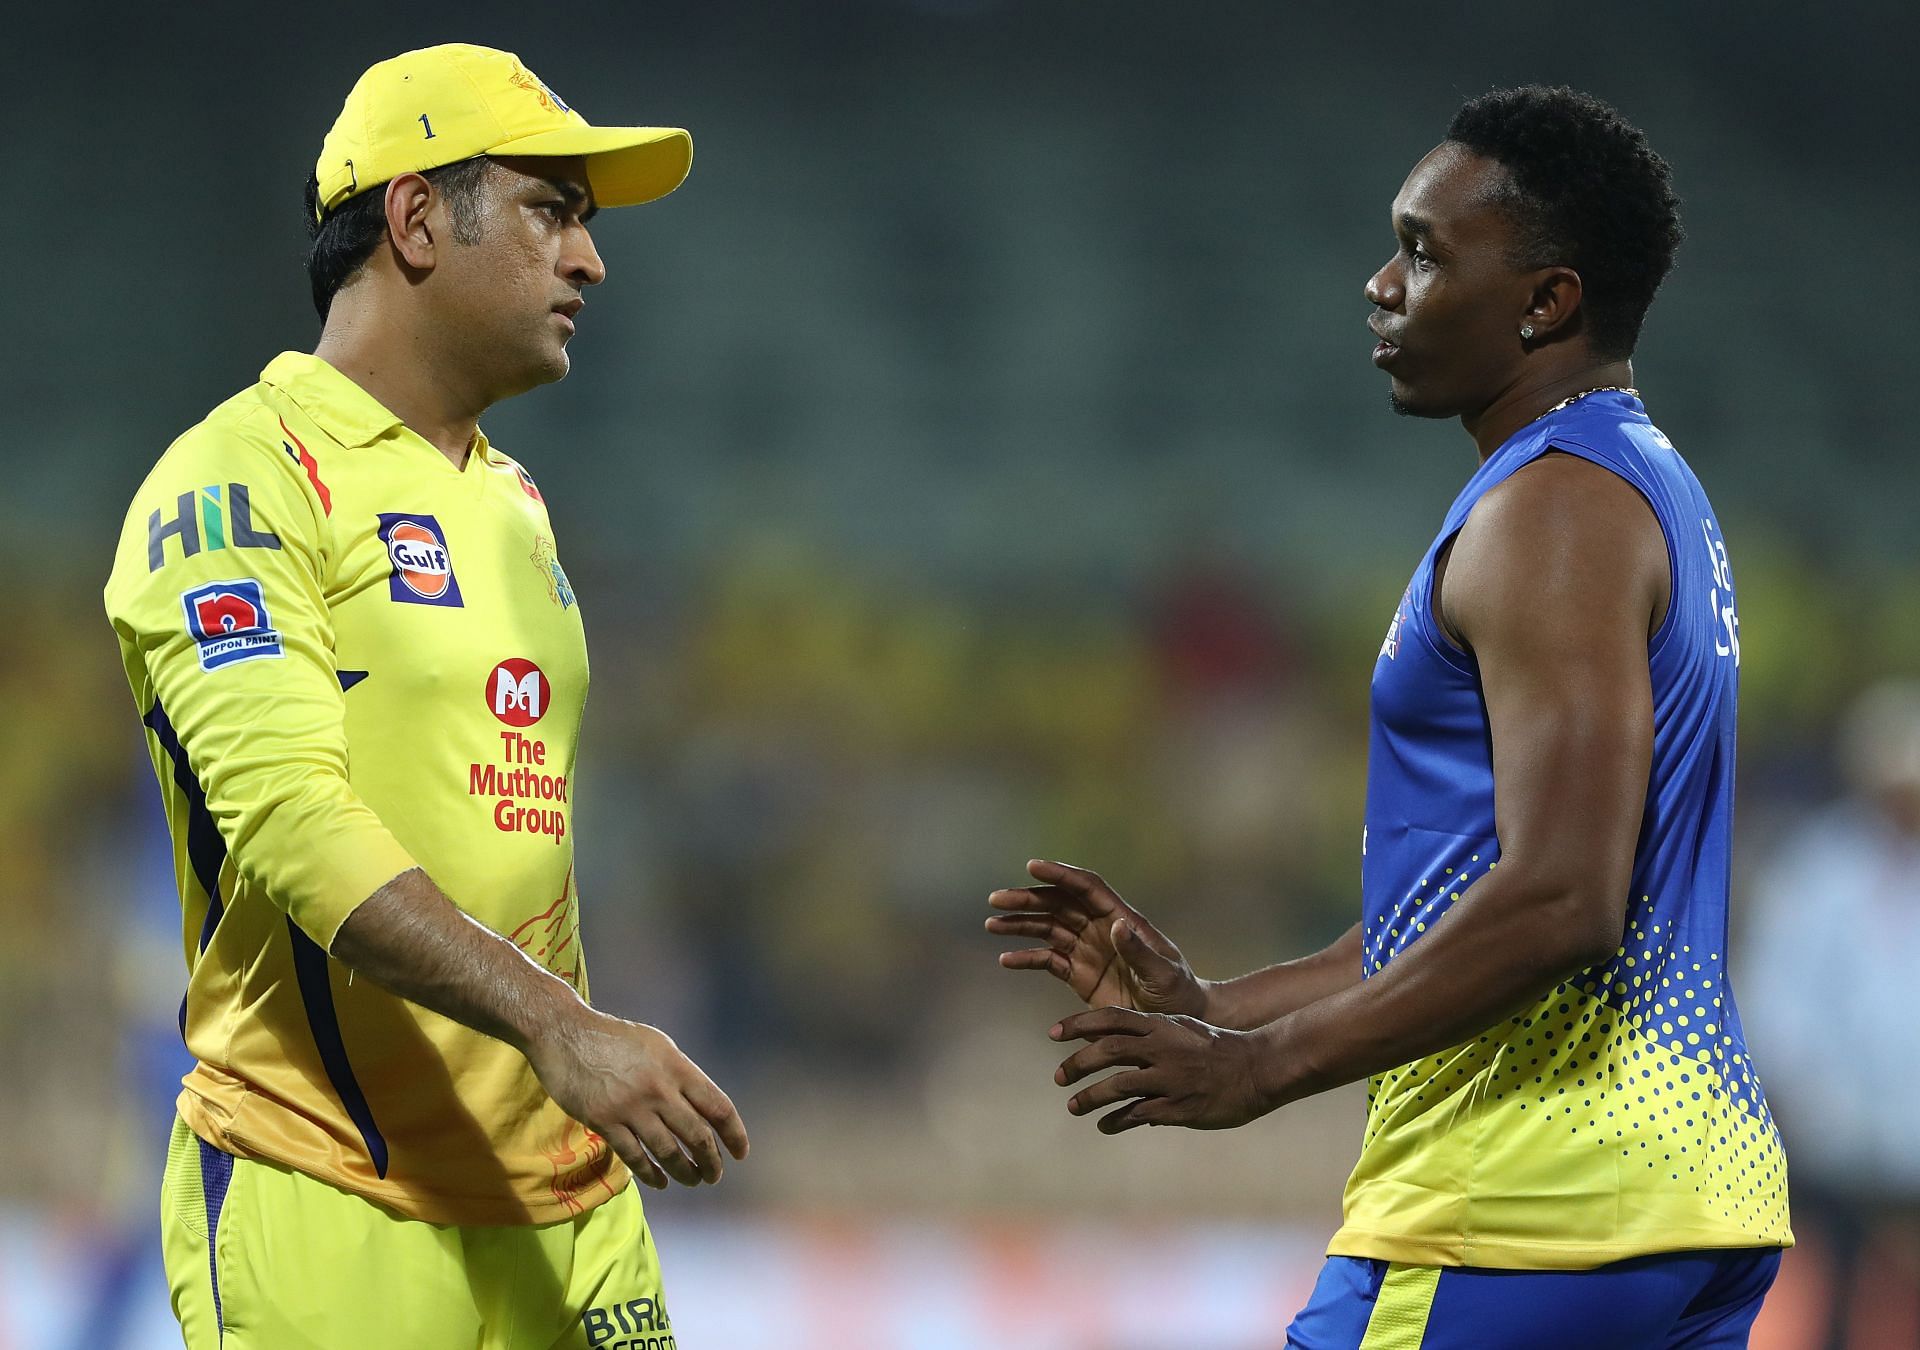 The Super Kings have been well-led by MS Dhoni over the years, while Dwayne Bravo remains their highest wicket-taker.